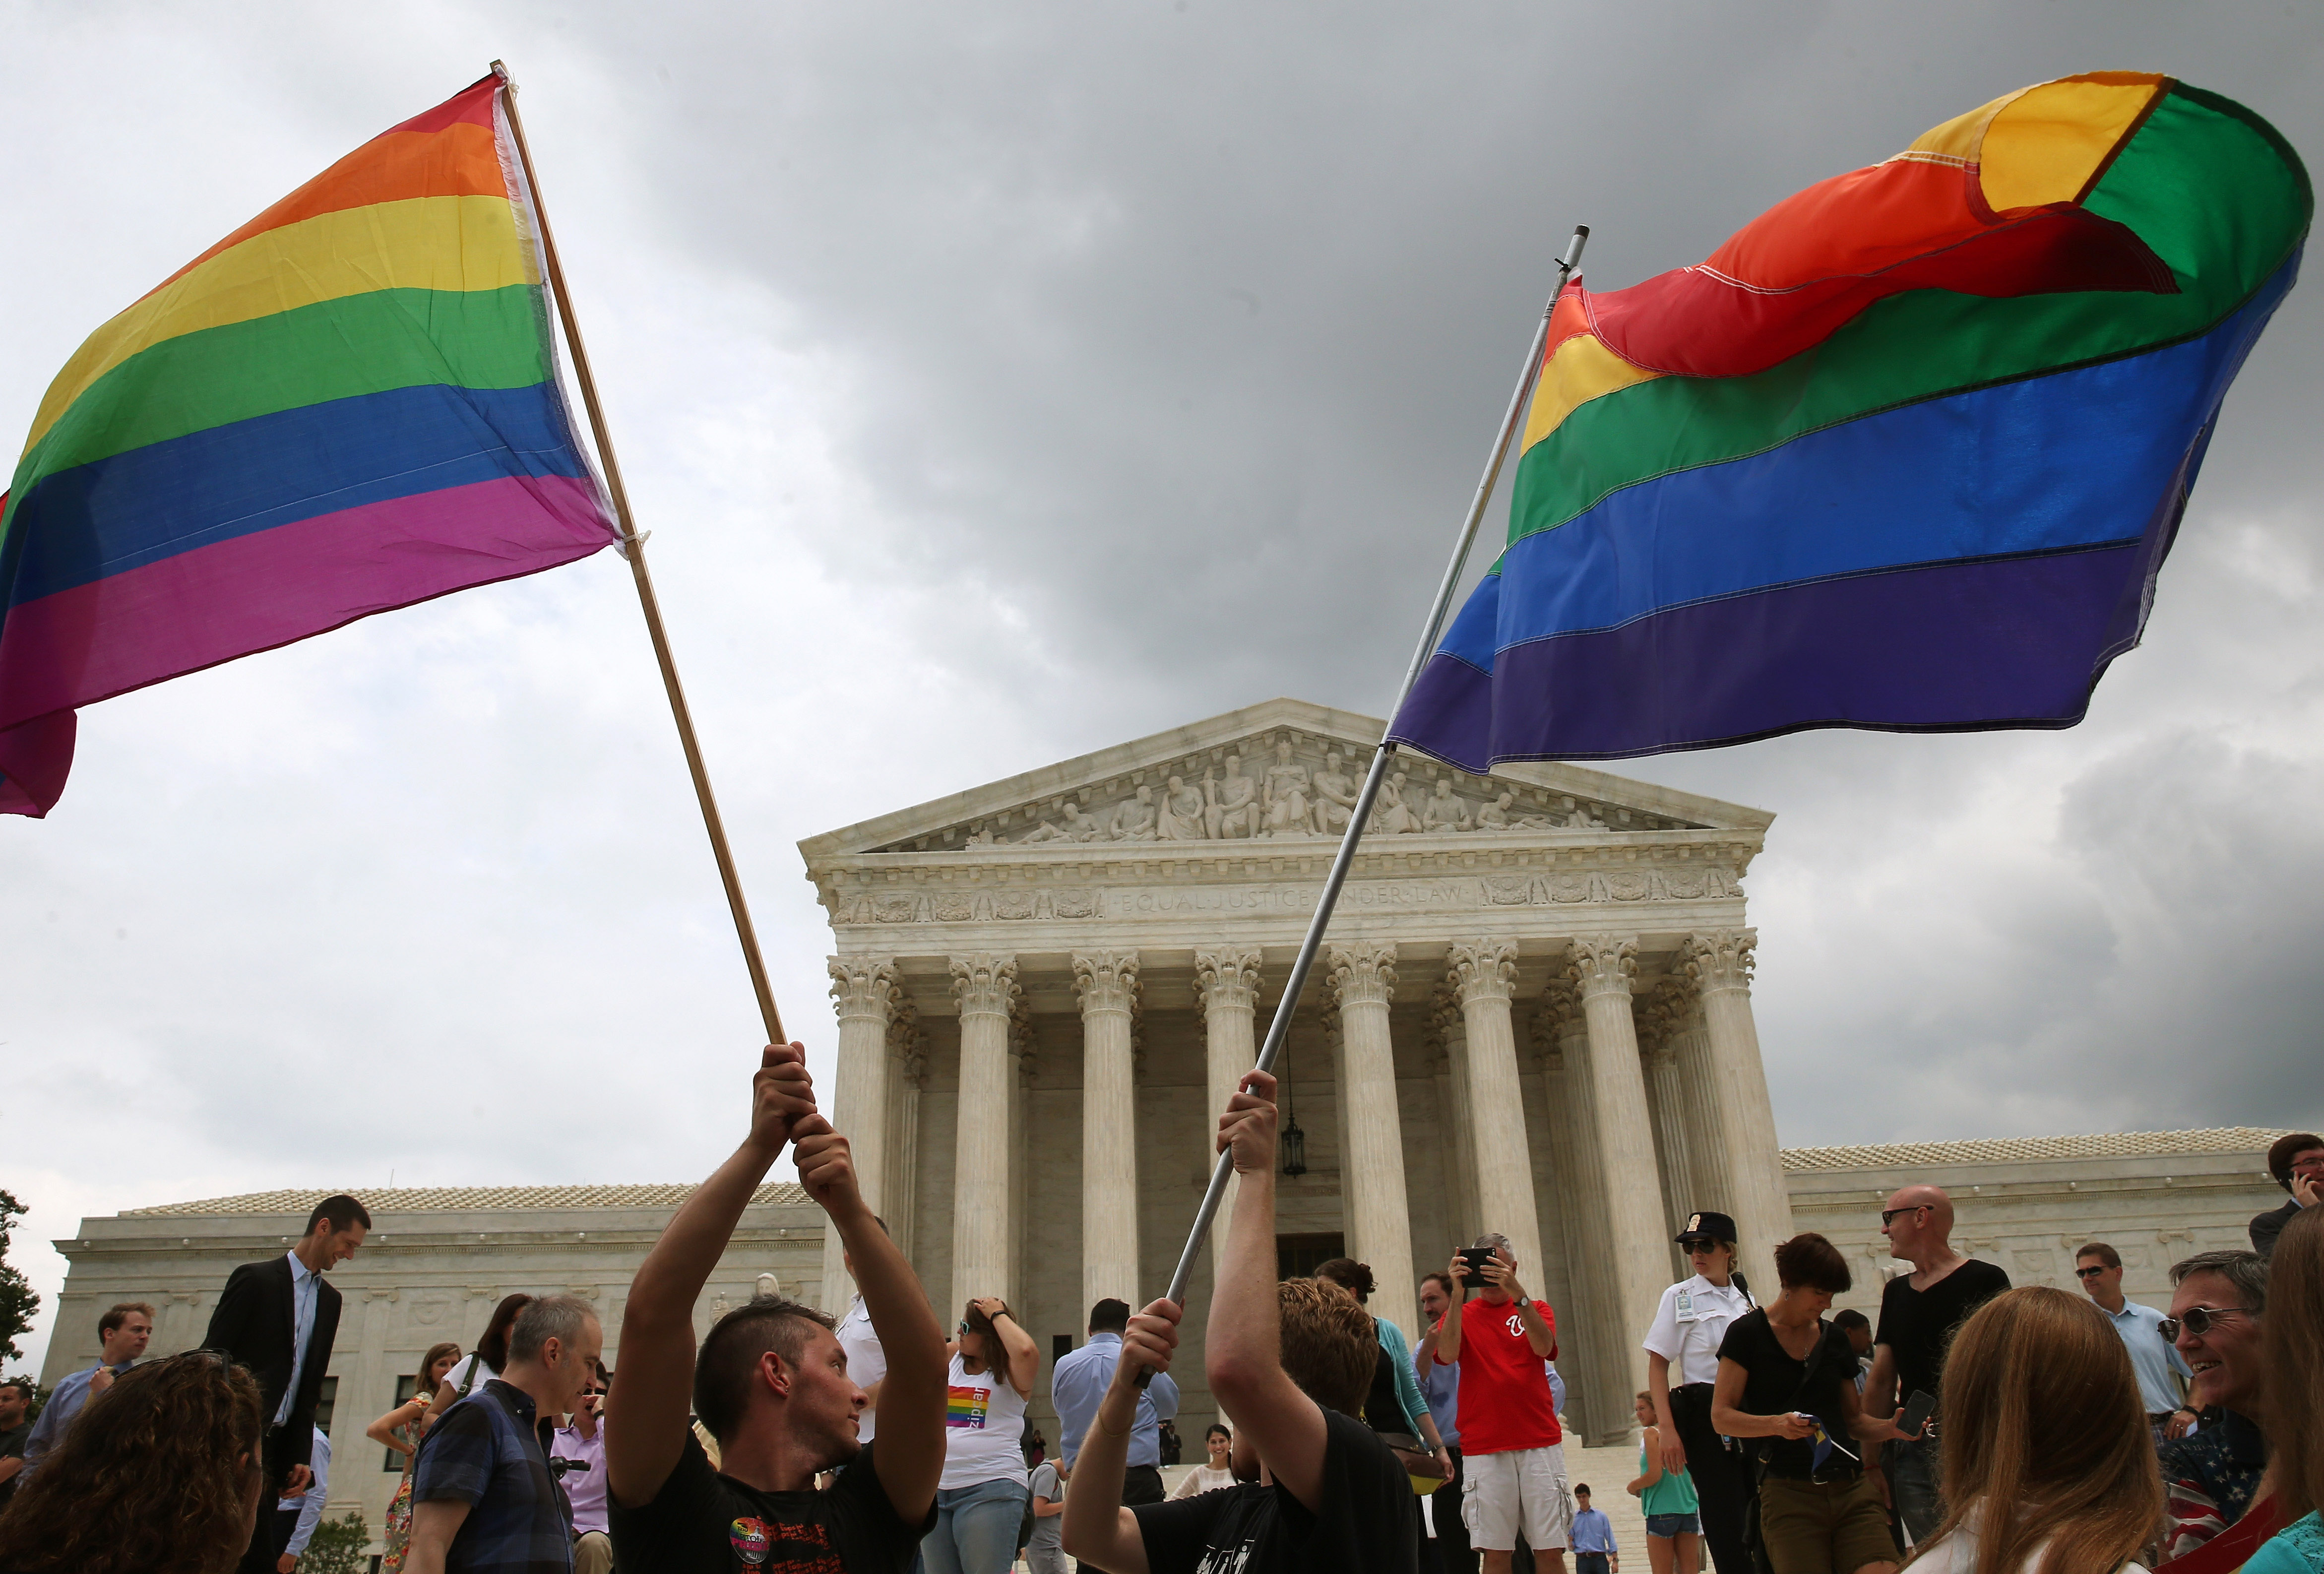 People celebrate in front of the U.S. Supreme Court after the ruling in favor of same-sex marriage June 26, 2015 in Washington, DC.